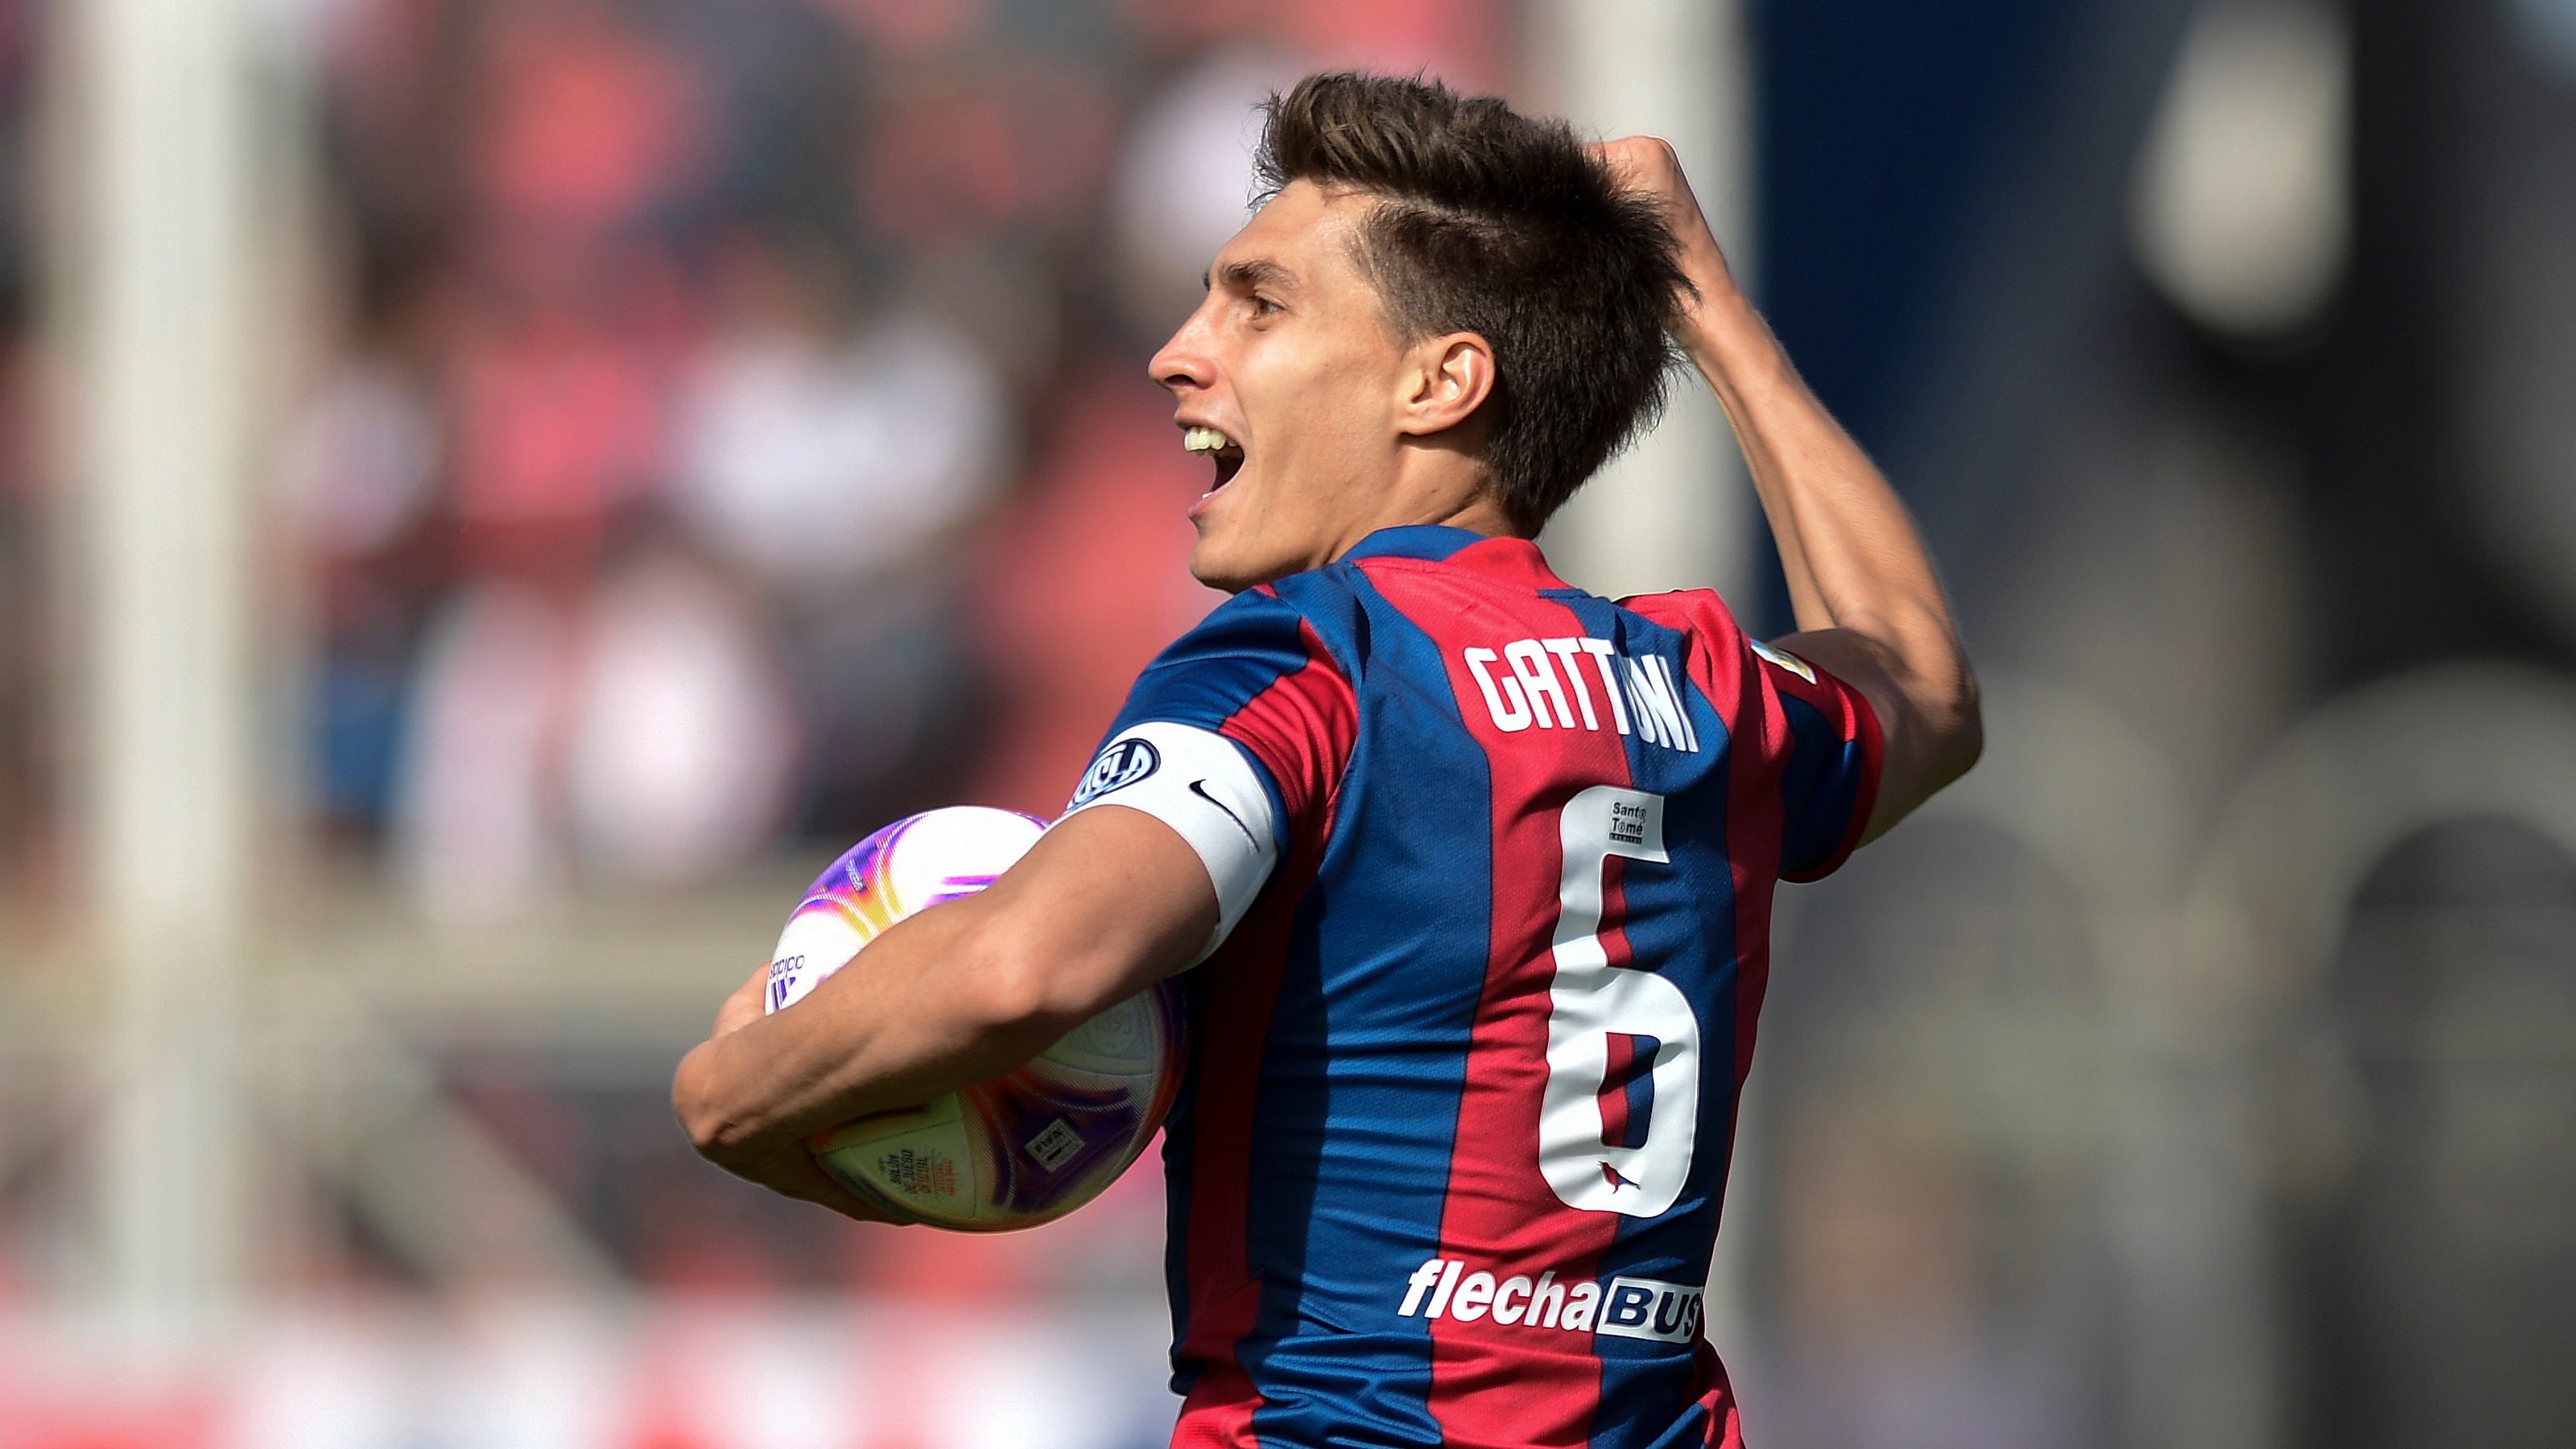 BUENOS AIRES, ARGENTINA - AUGUST 27, 2022 - Federico Gattoni of San Lorenzo celebrates after scoring his team's first goal during a match between San Lorenzo and Rosario Central.  (Photo by Gustavo Garello/Jam Media/Getty Images)